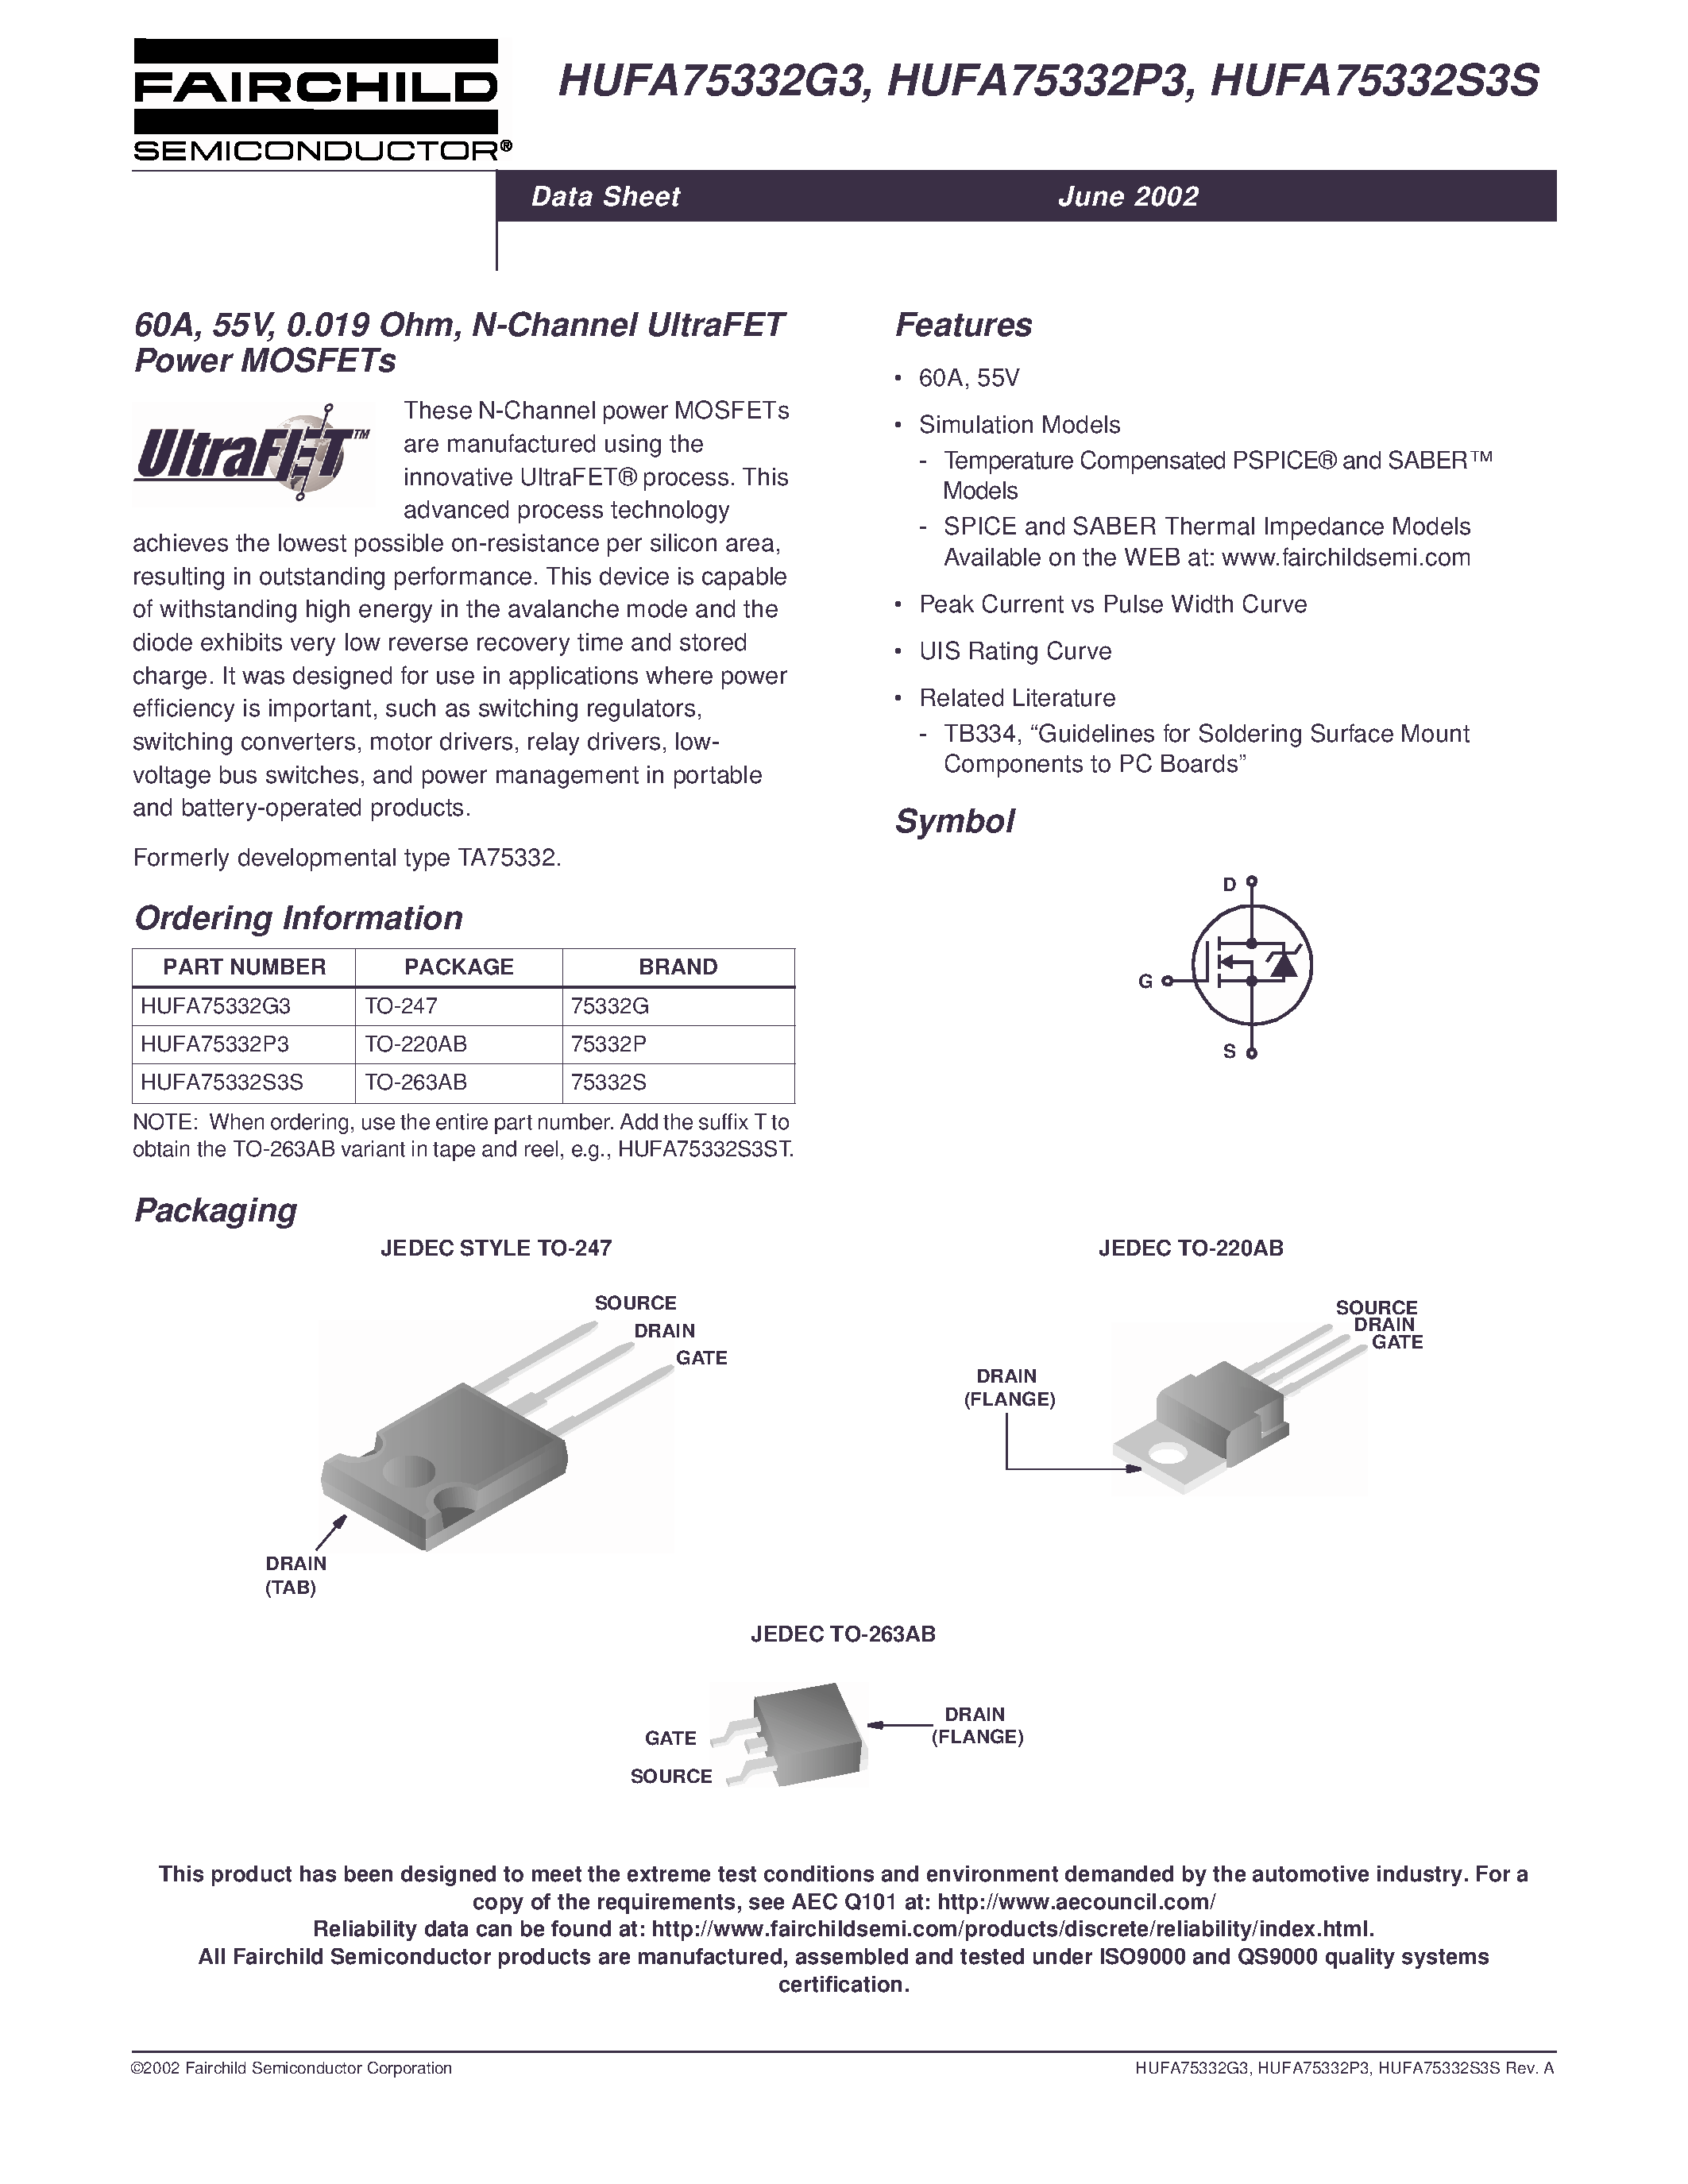 Datasheet HUFA75329P3 - 49A/ 55V/ 0.024 Ohm/ N-Channel UltraFET Power MOSFETs page 1